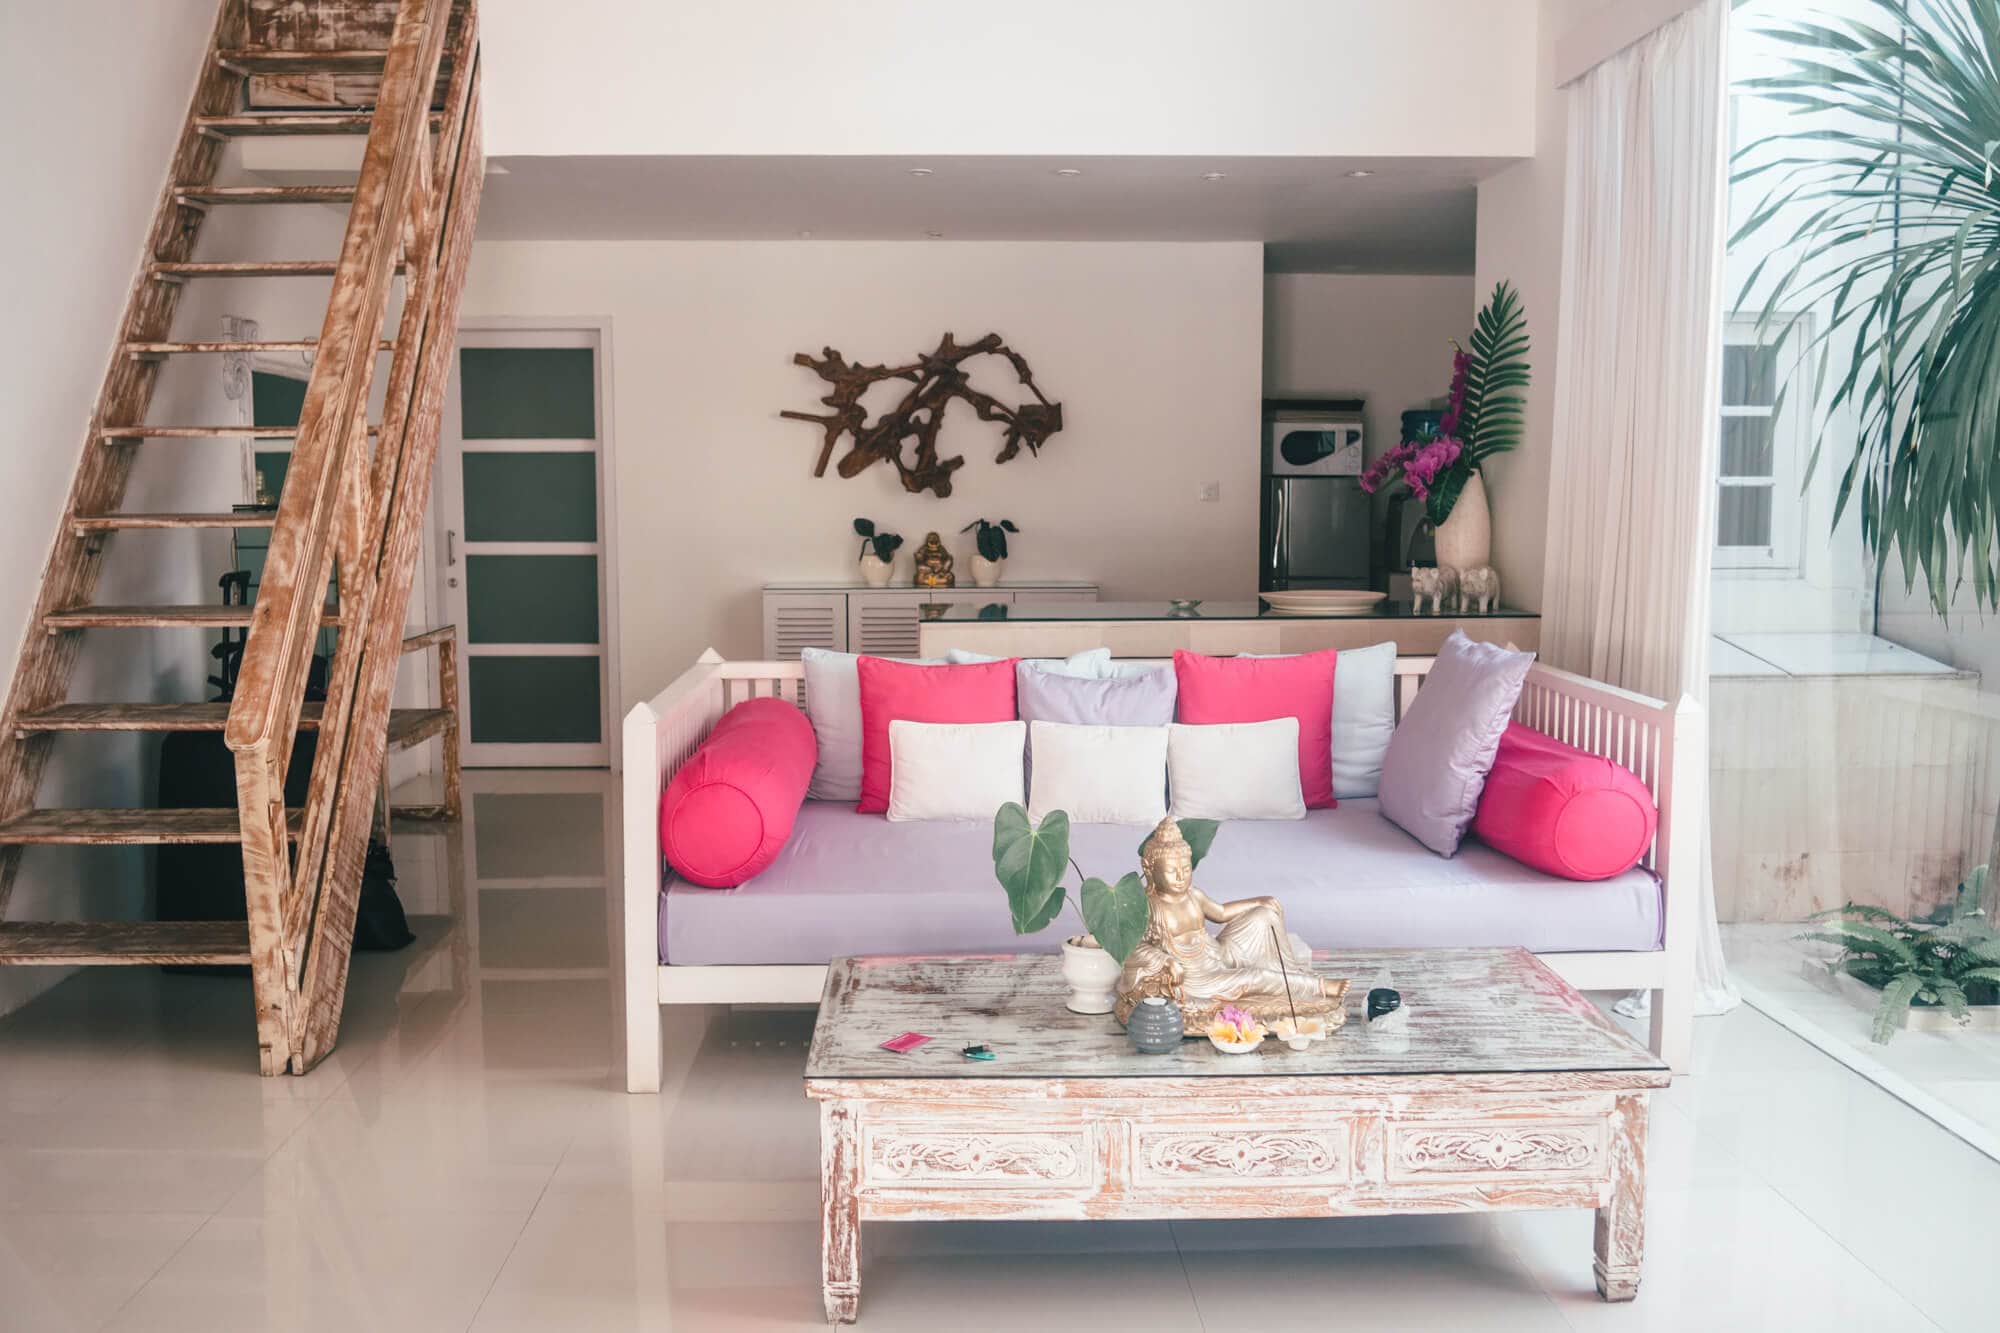 Bali's best budget hotels, villas & Airbnbs - Stay in style in this Instagrammable villa in Seminyak